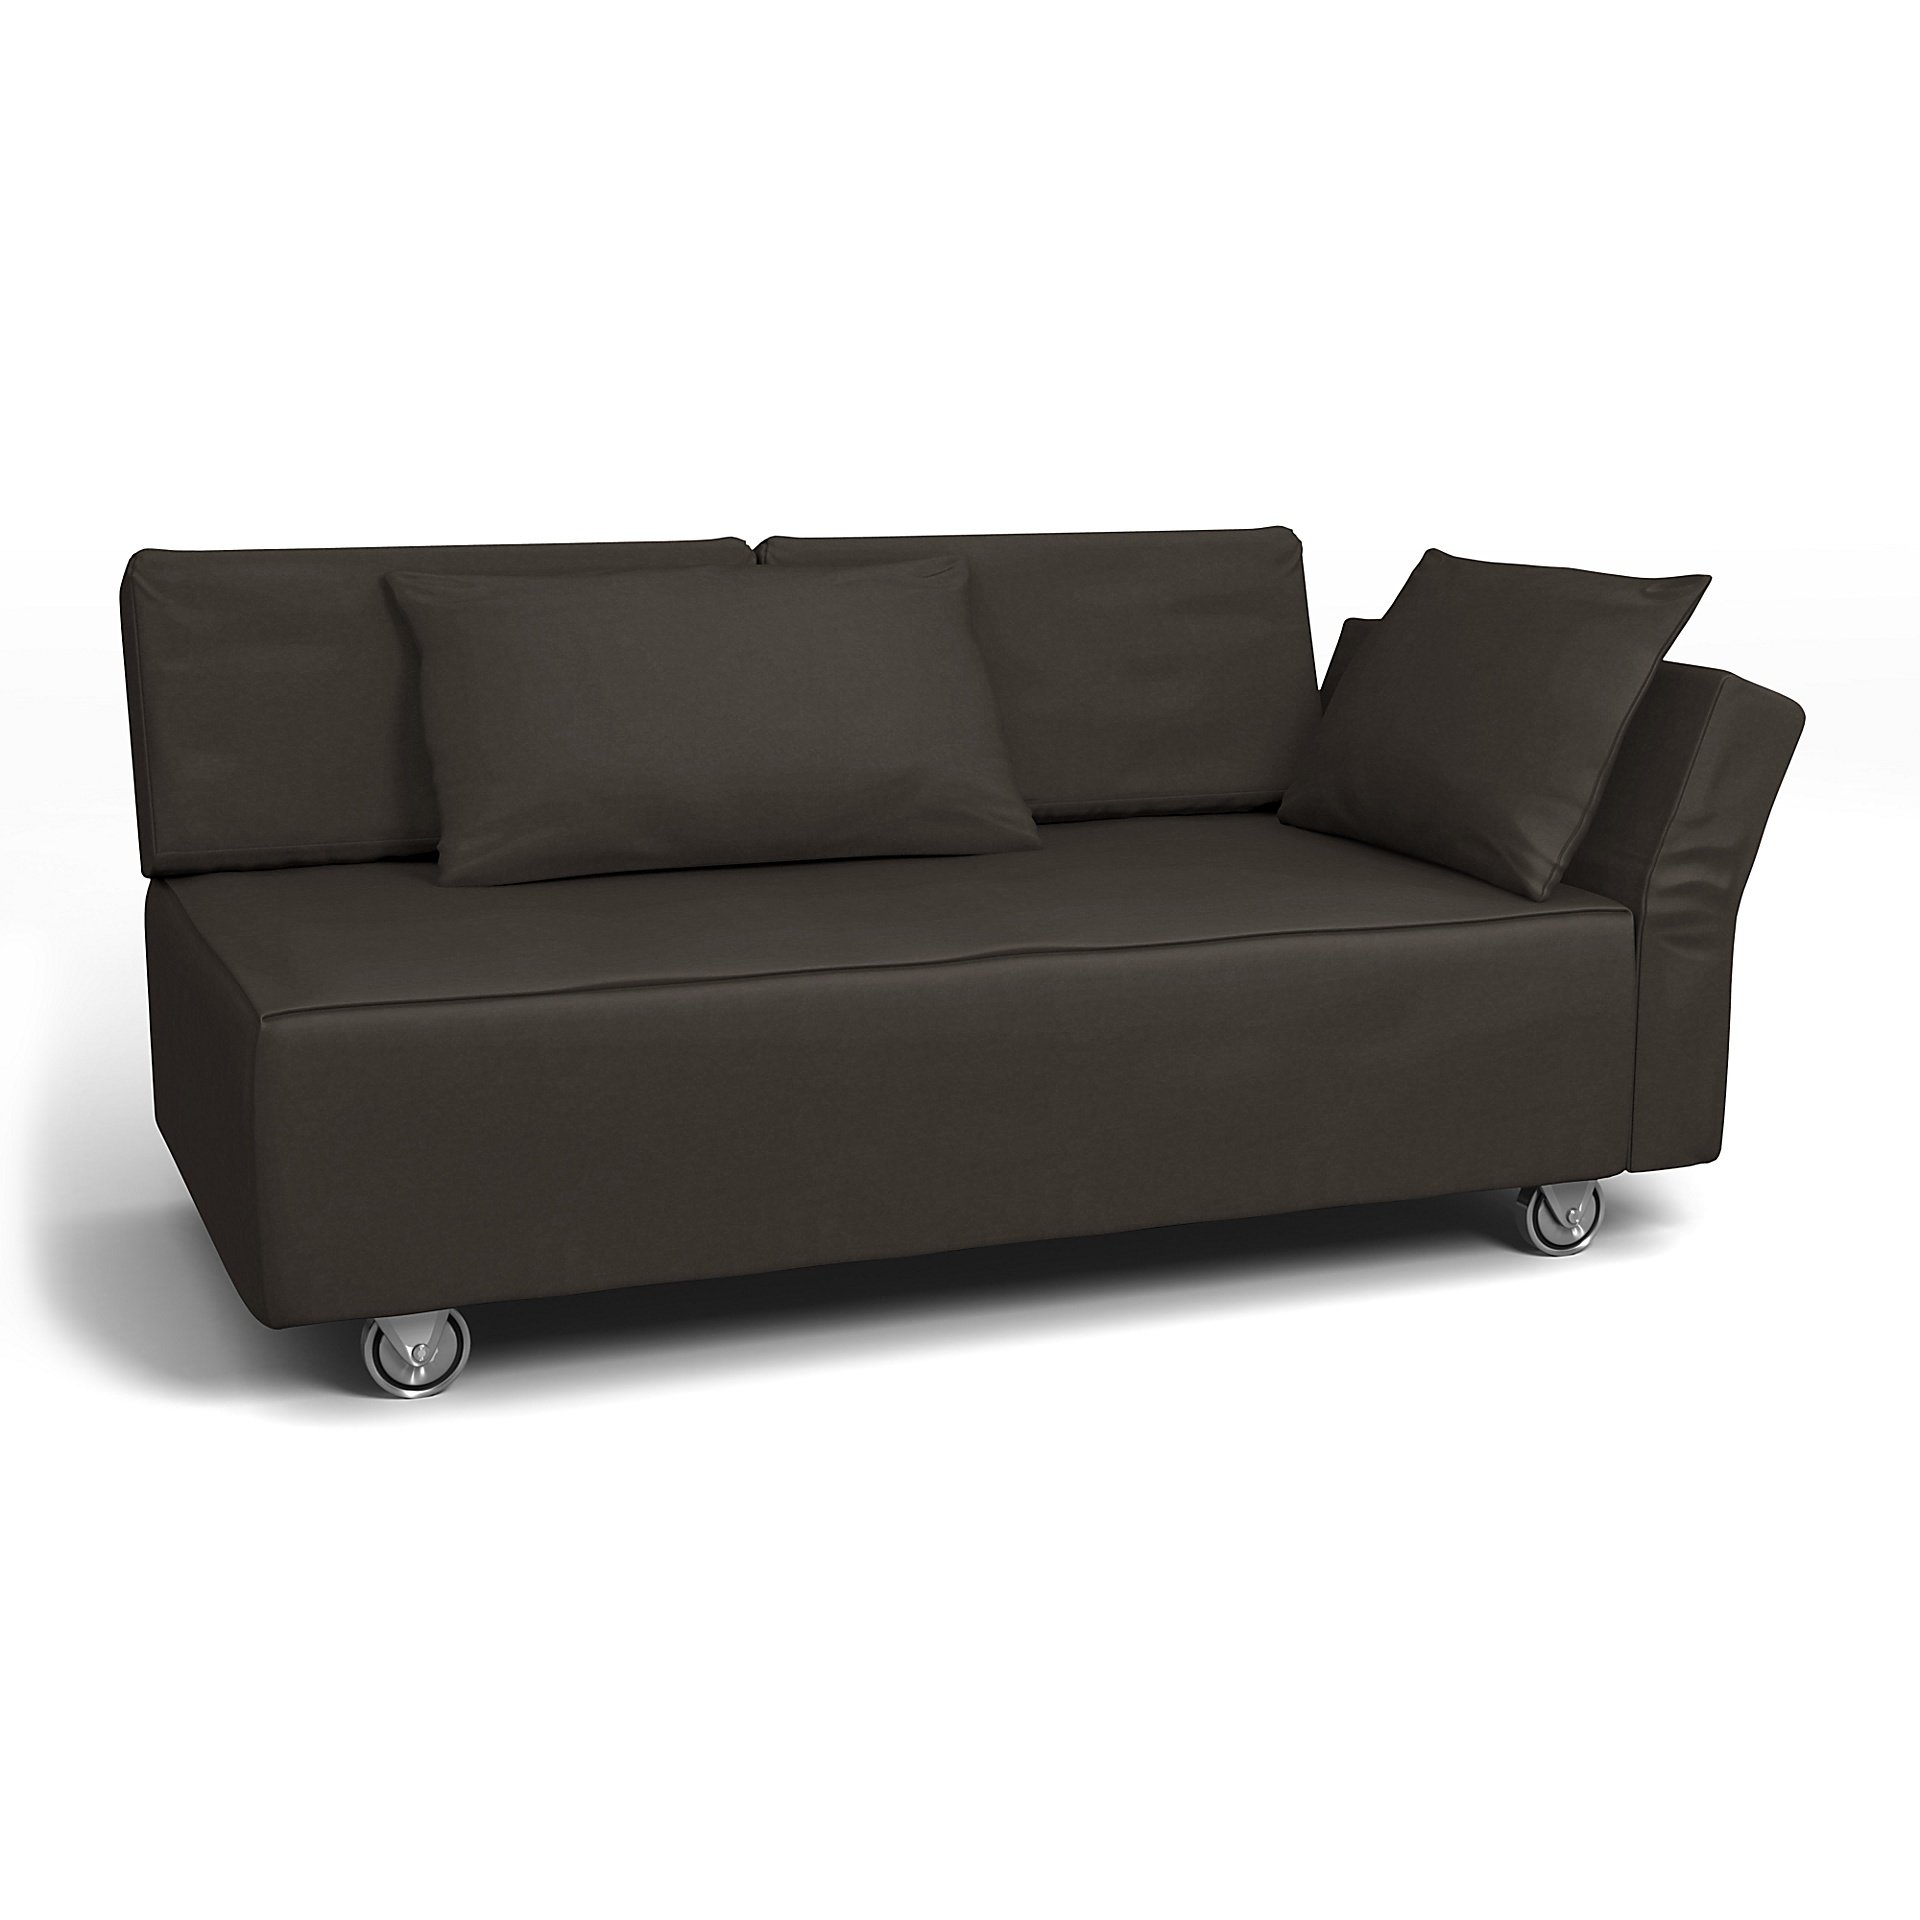 IKEA - Falsterbo 2 Seat Sofa with Right Arm Cover, Licorice, Velvet - Bemz